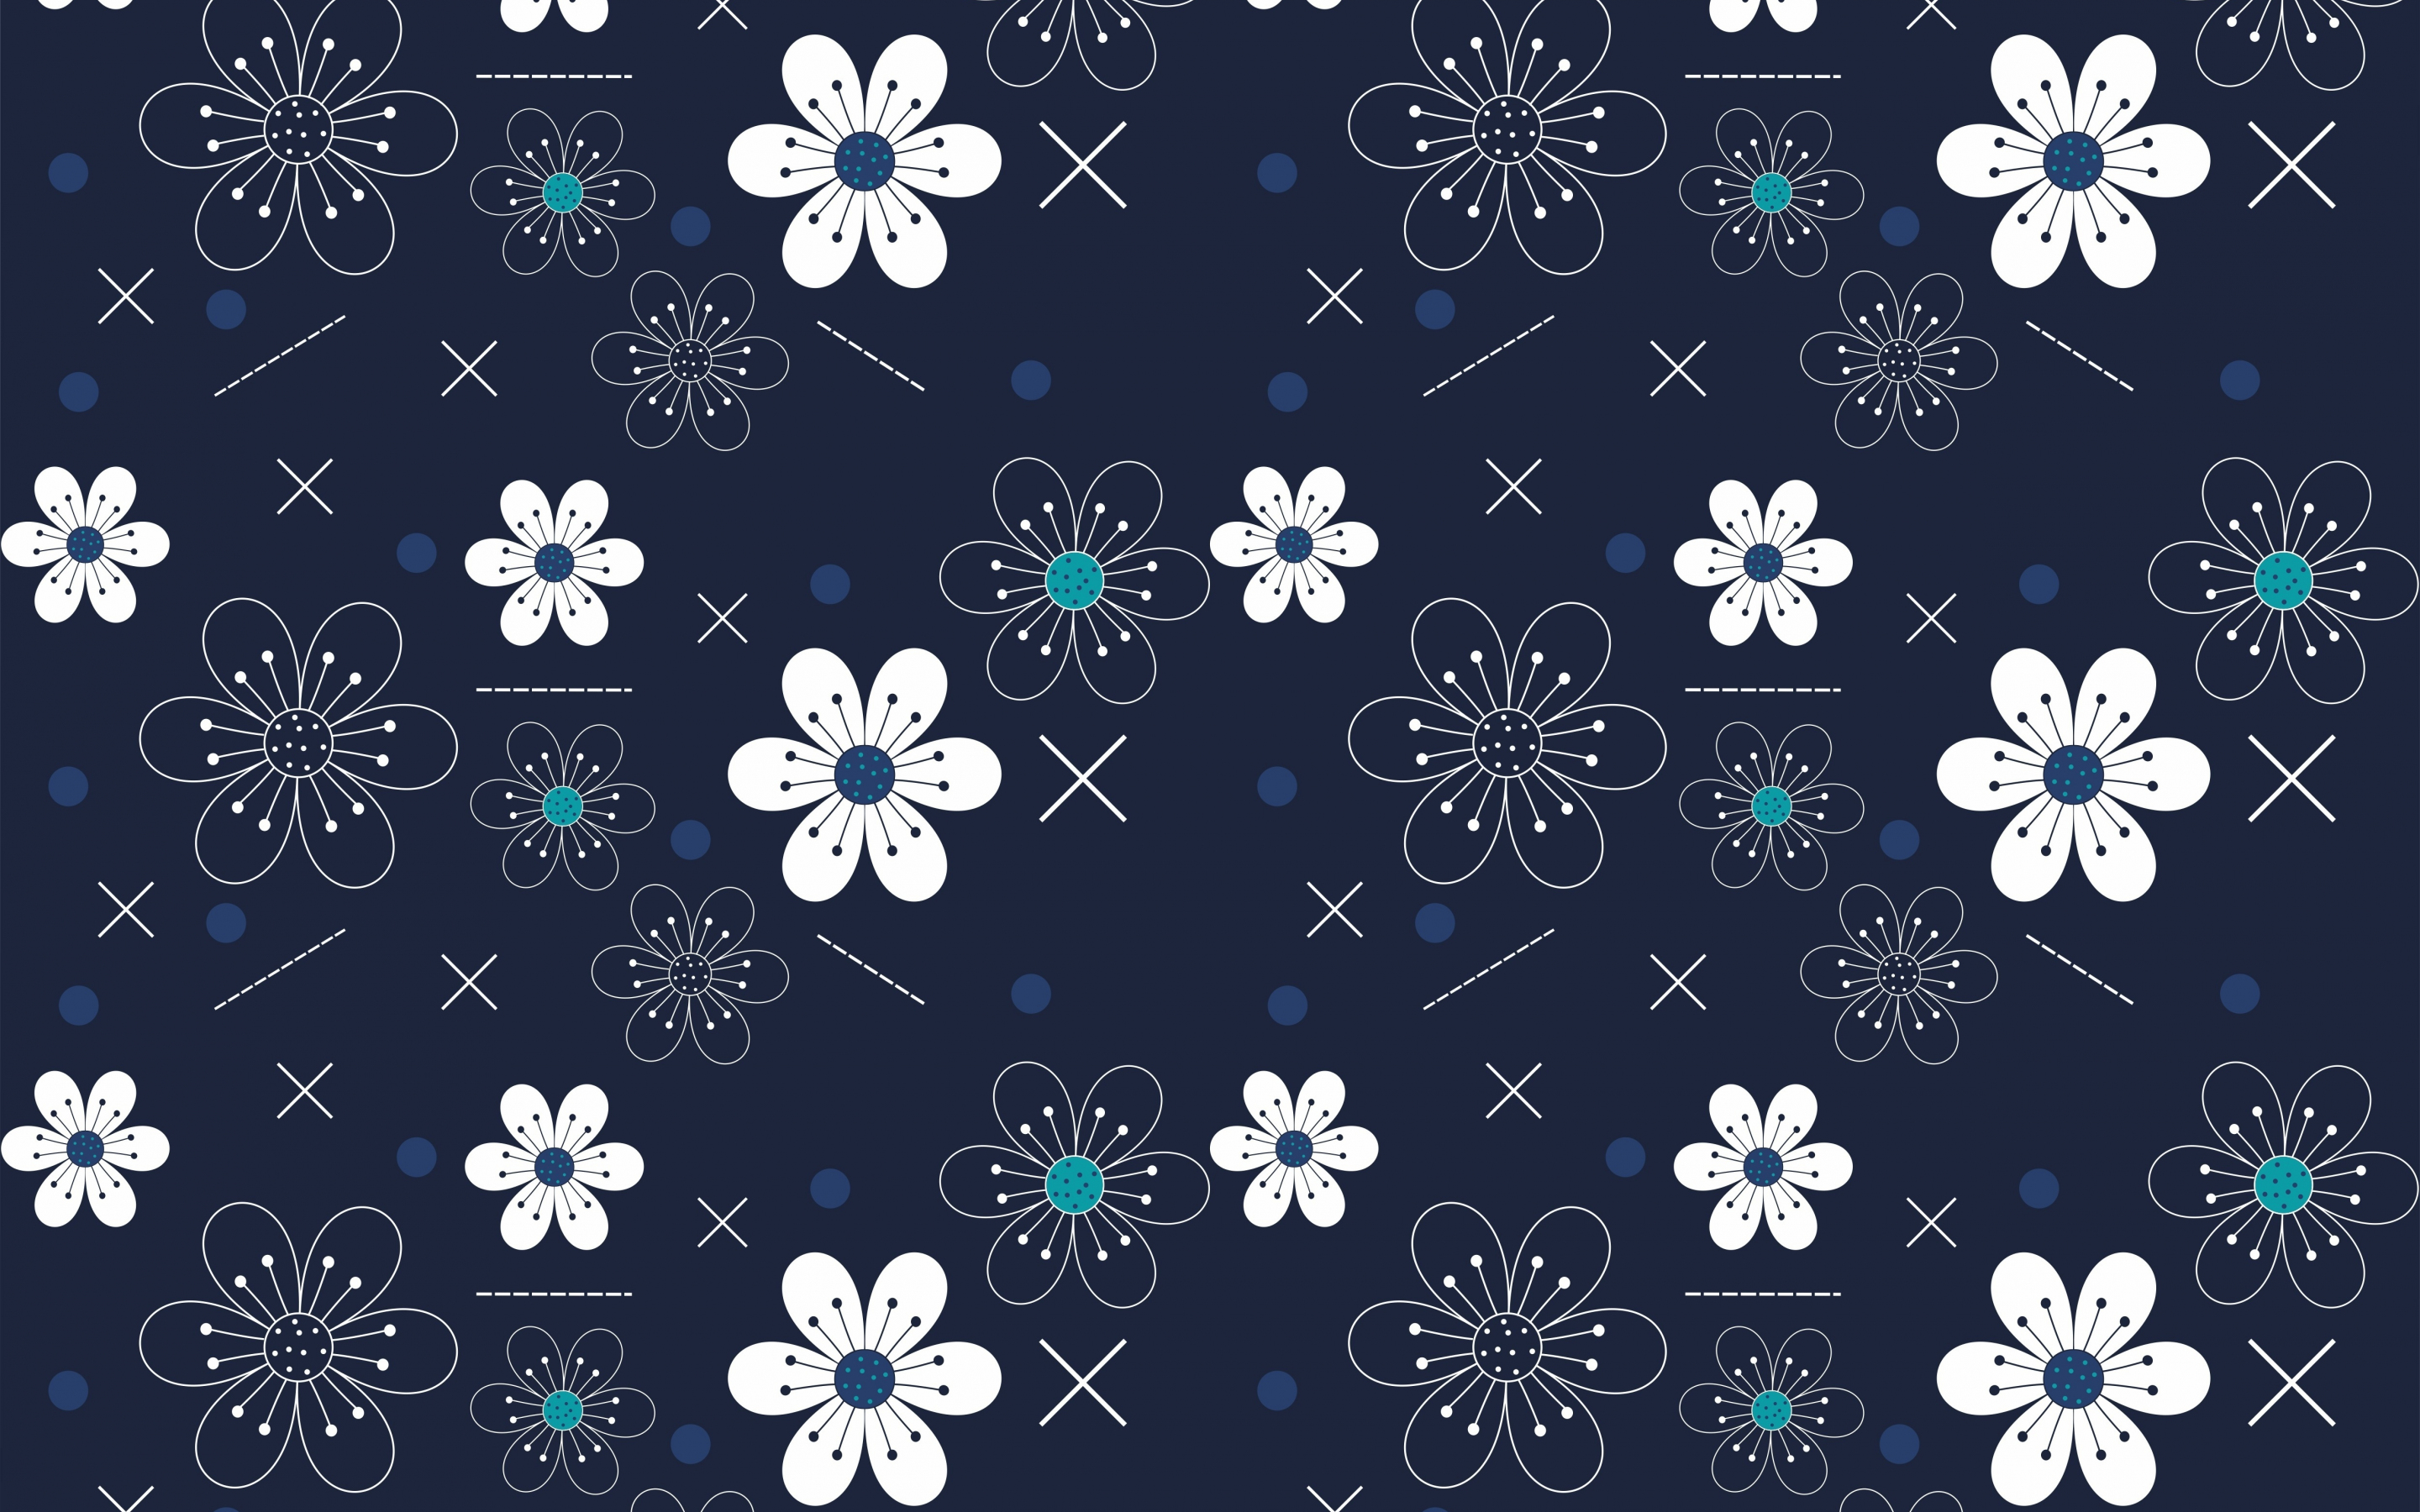 Flowers, abstract, pattern, 2880x1800 wallpaper